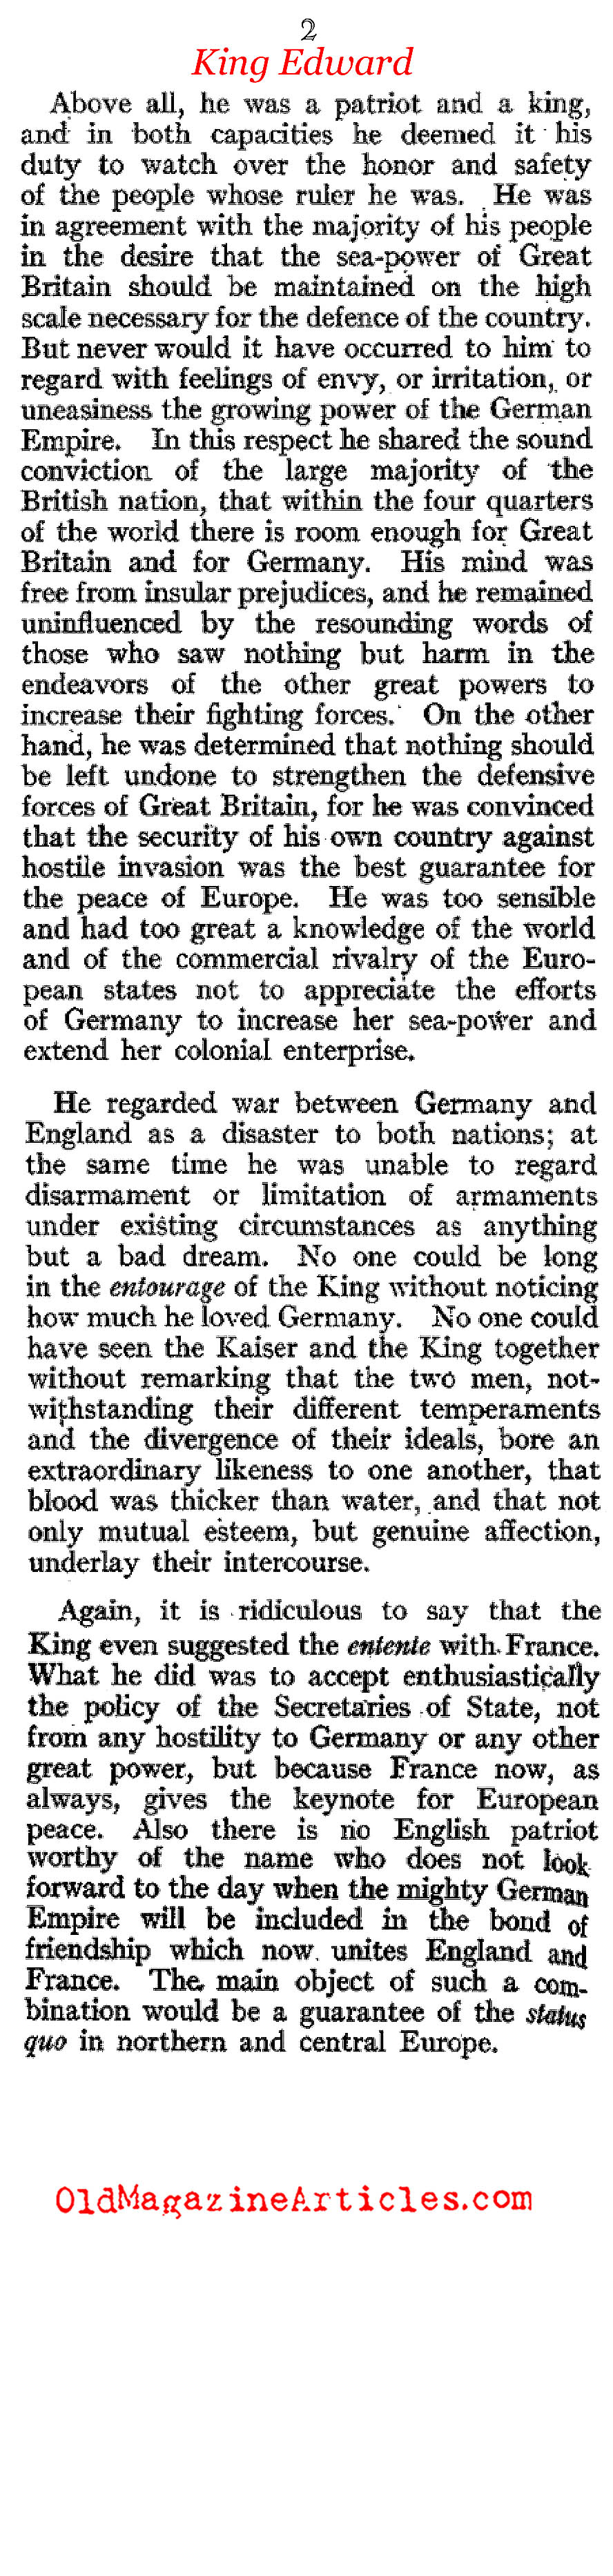 The Policies of King Edward VII (Review of Reviews, 1910)